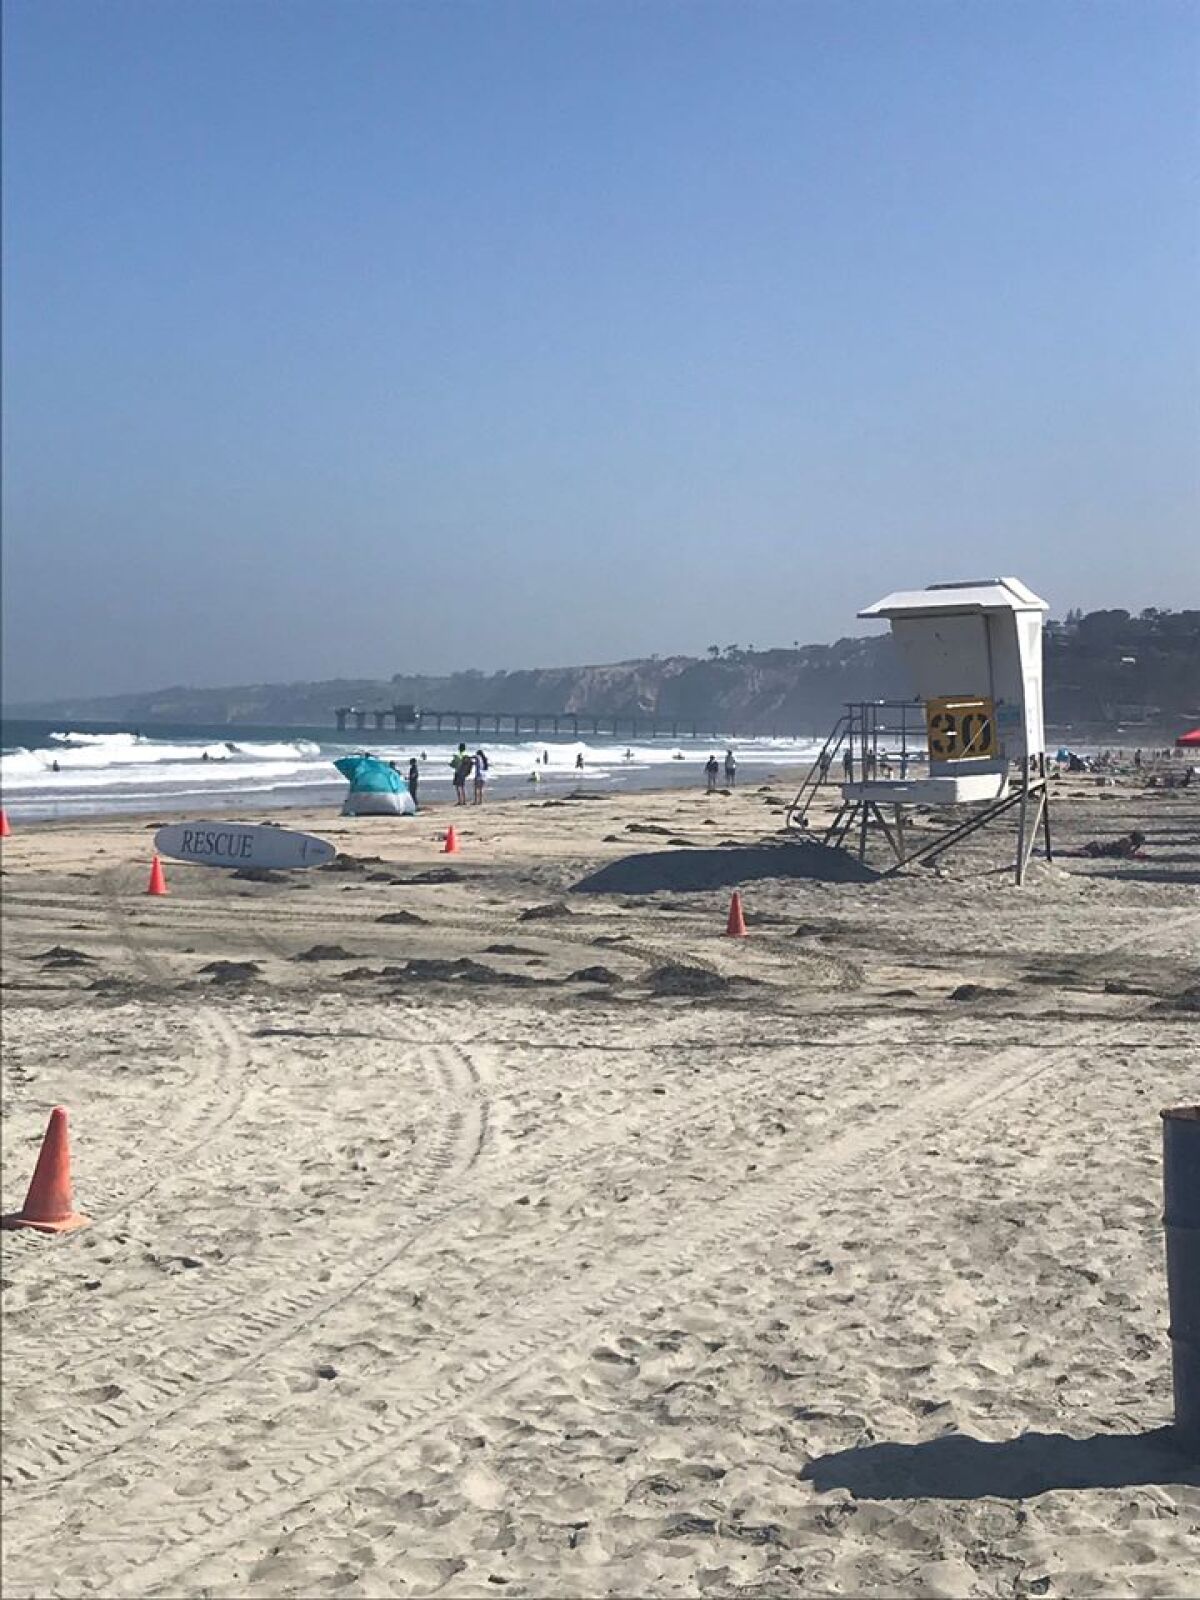 City of San Diego owned parks and beaches are now closed.